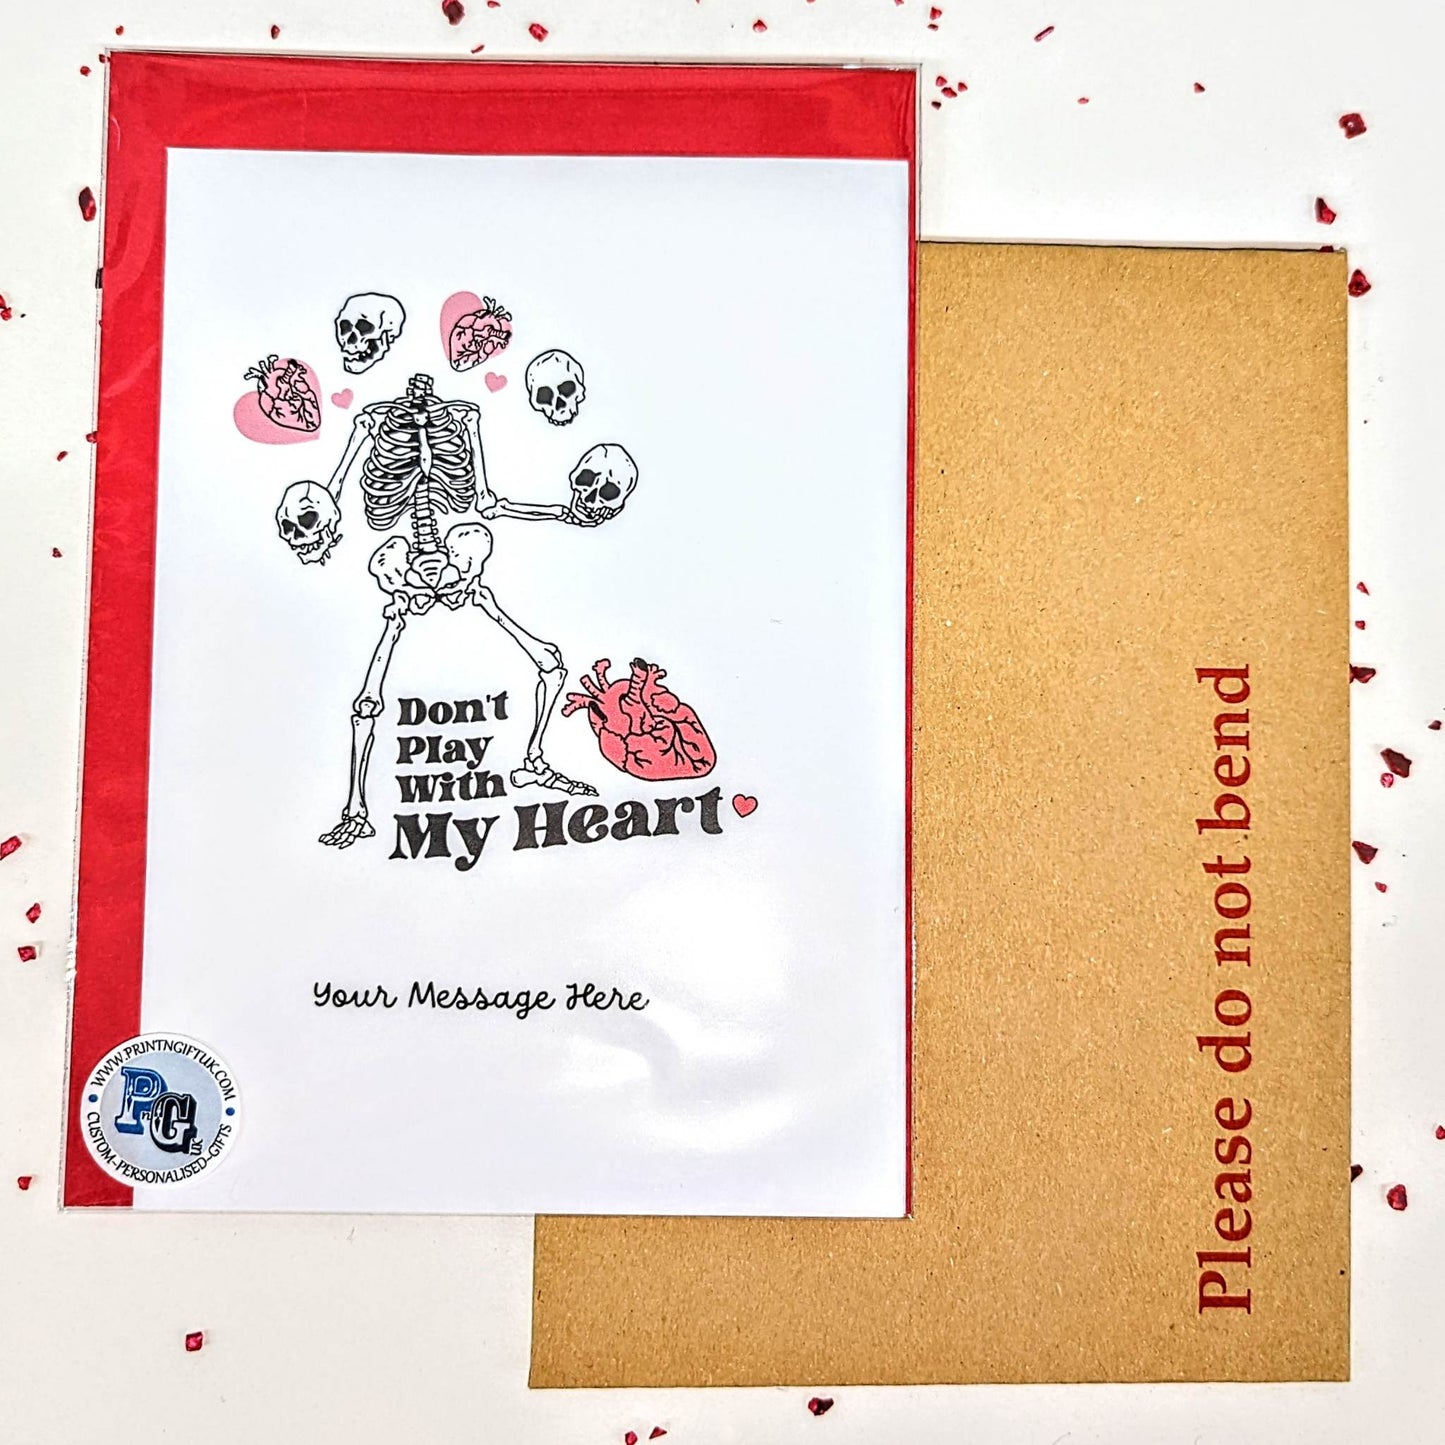 "Don't play with my heart" Alternative Valentine's Day Skeleton Greetings Card with red Envelope